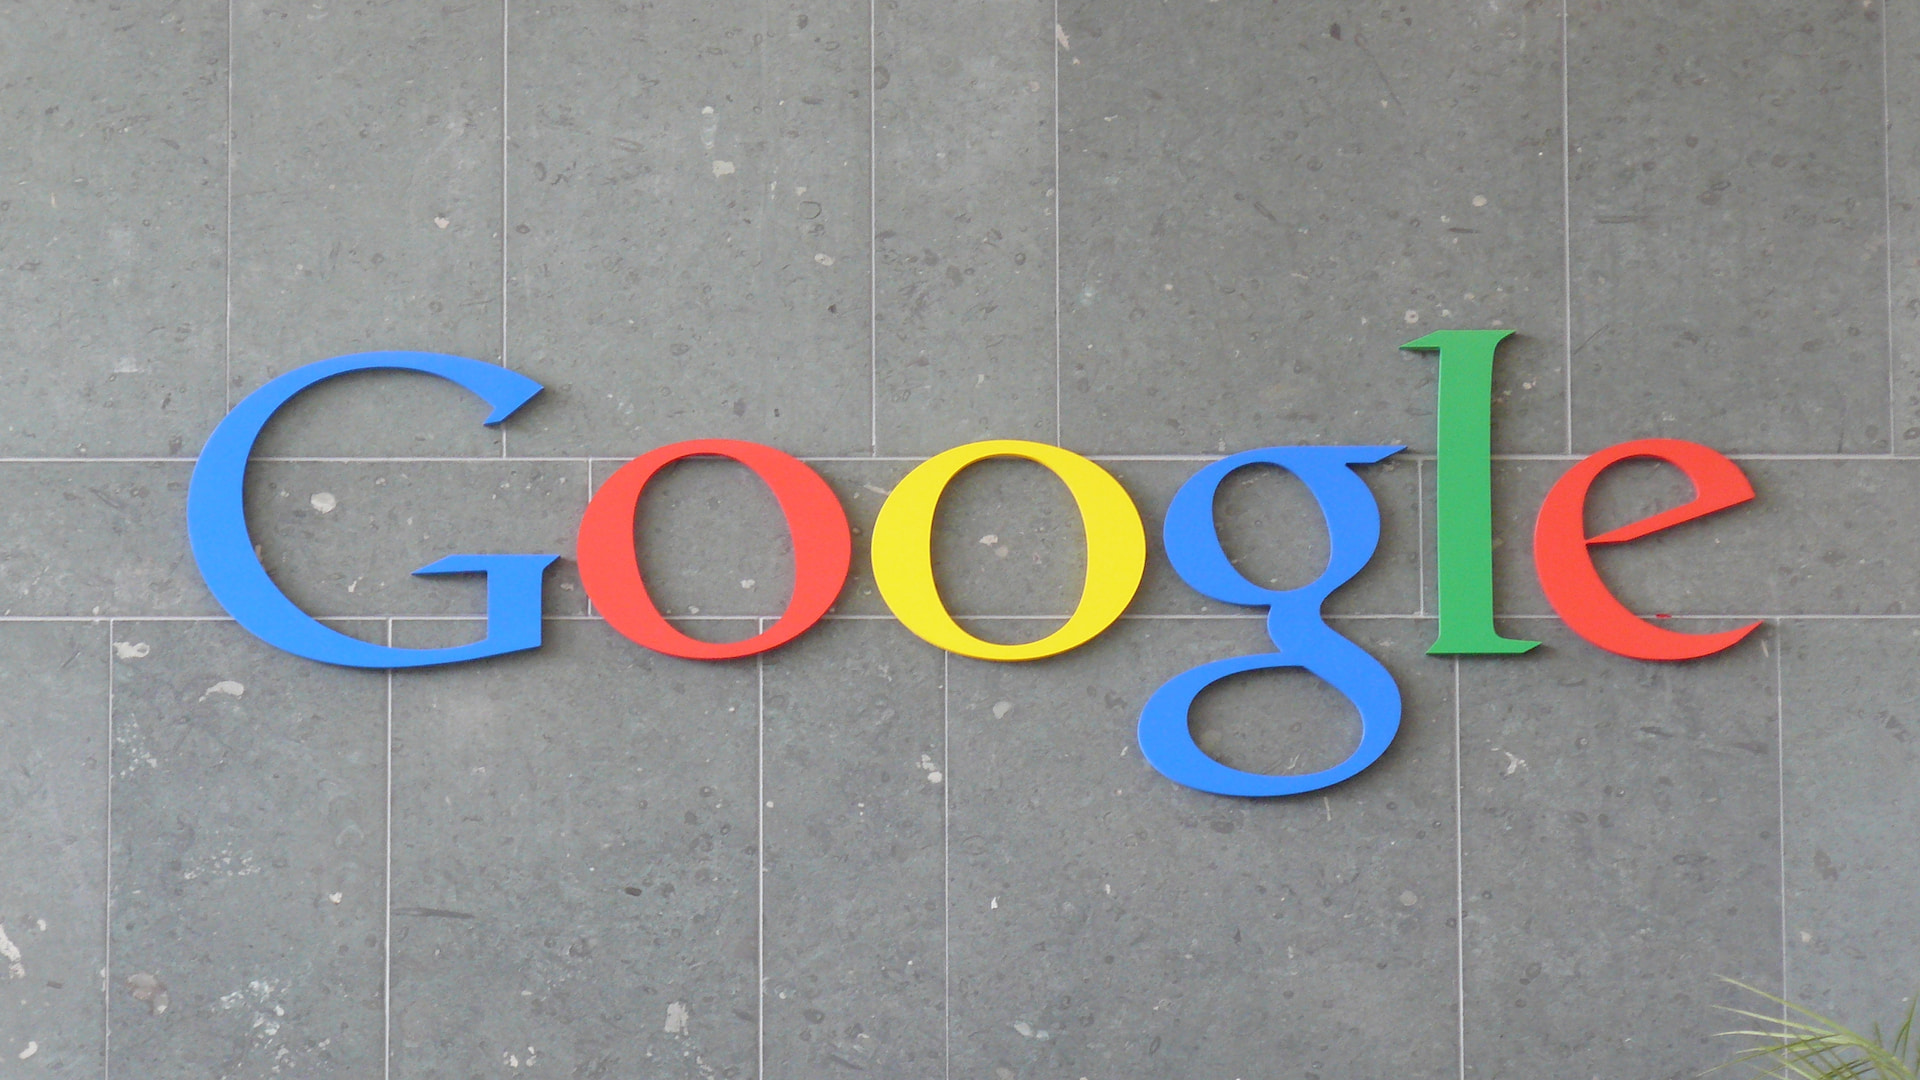 Google is reportedly testing a product to play games via